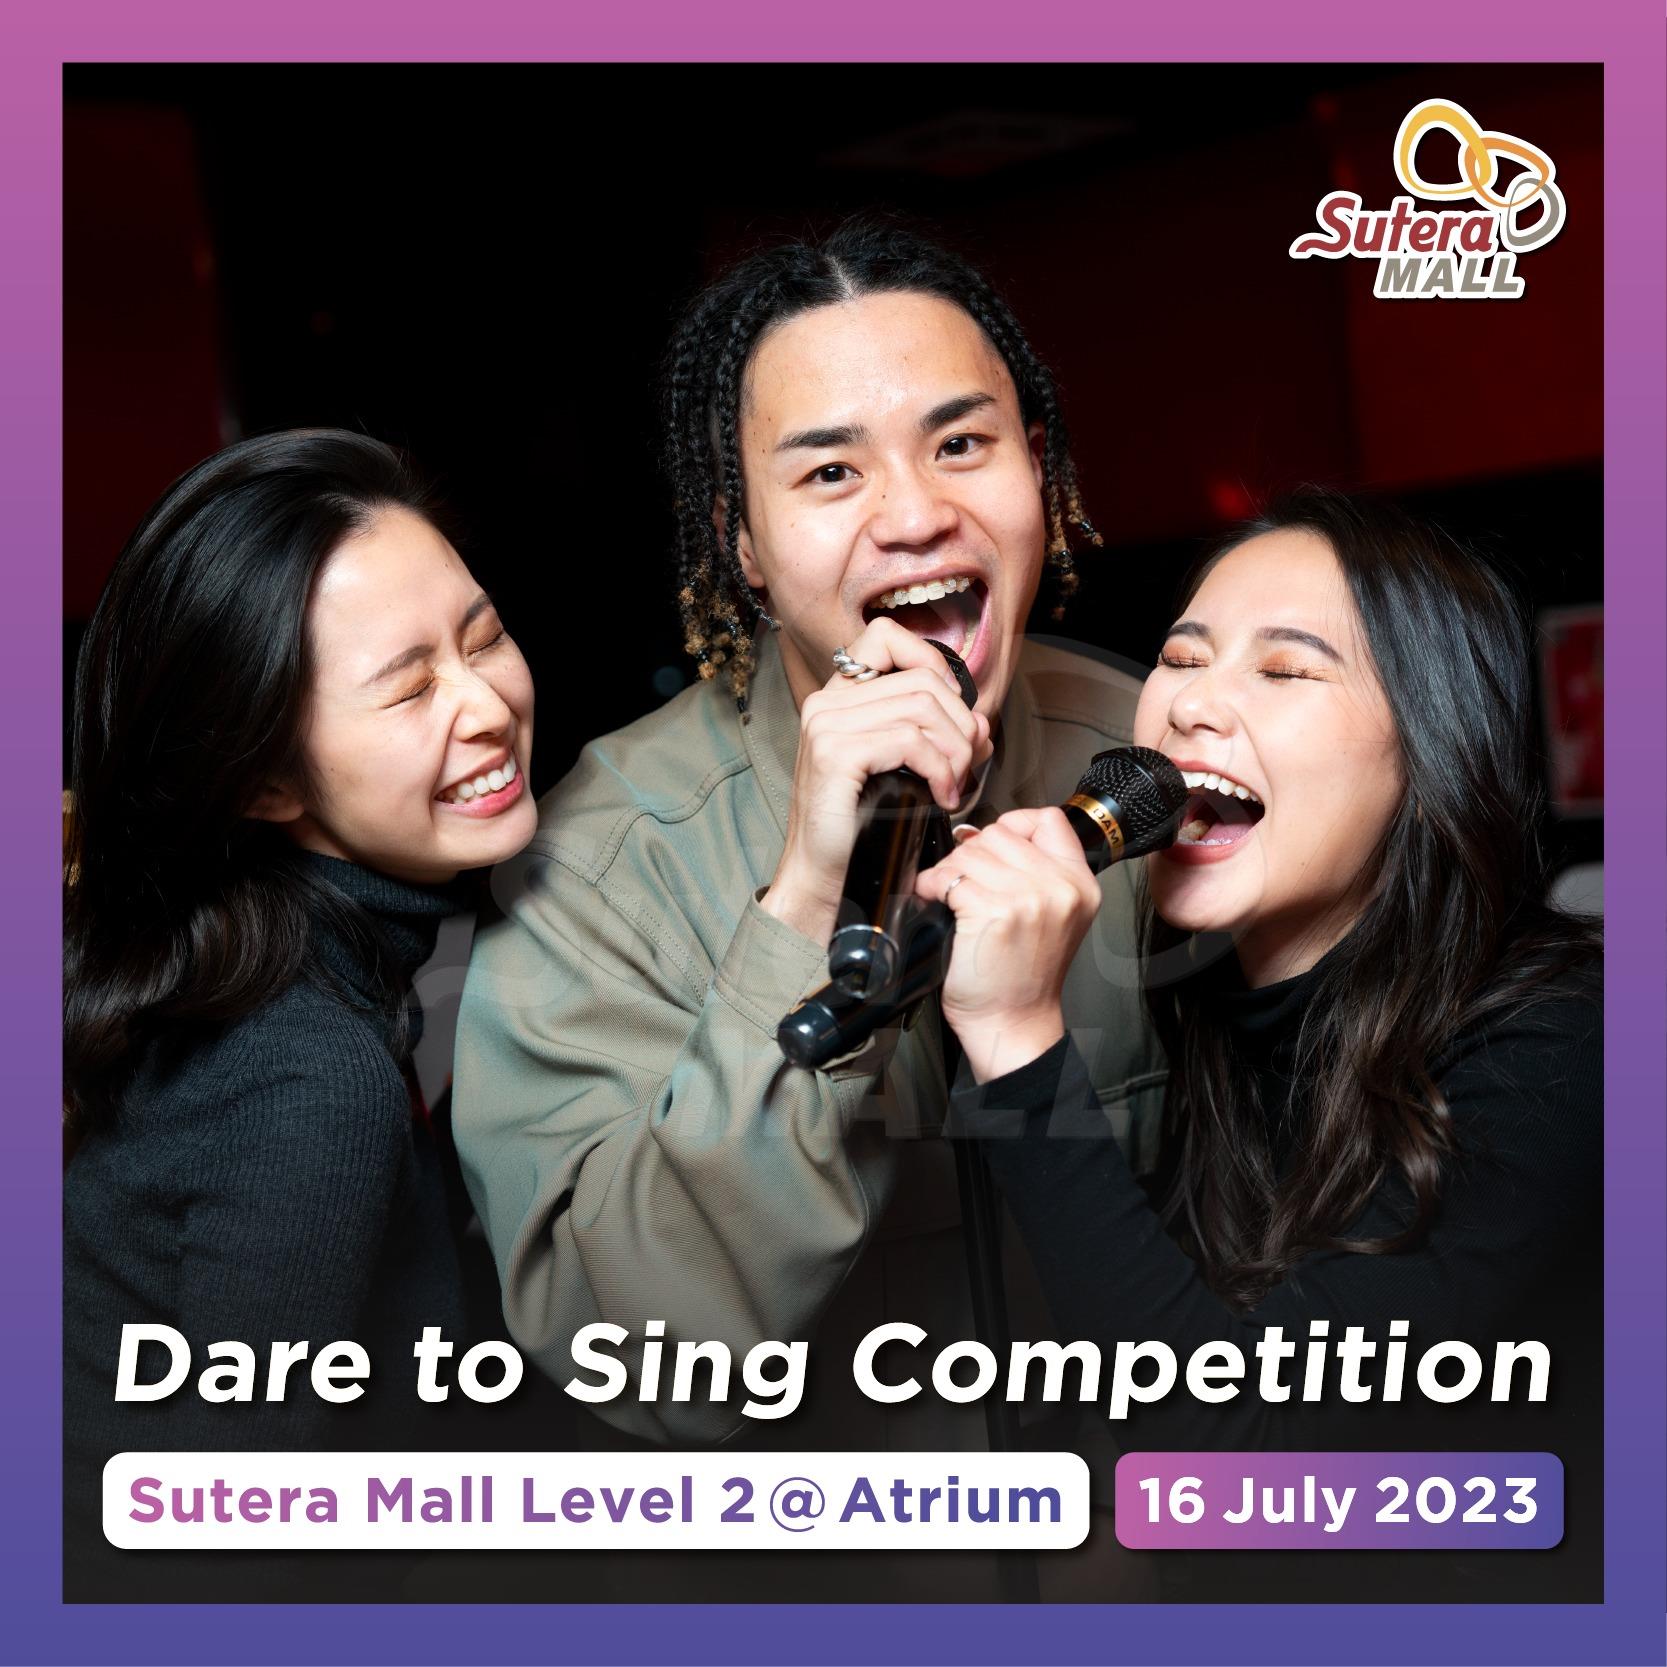 <div class='event-date'>16 Jul 2023</div><div class='event-title'><h4>Dare to Sing Competition</h4></div>